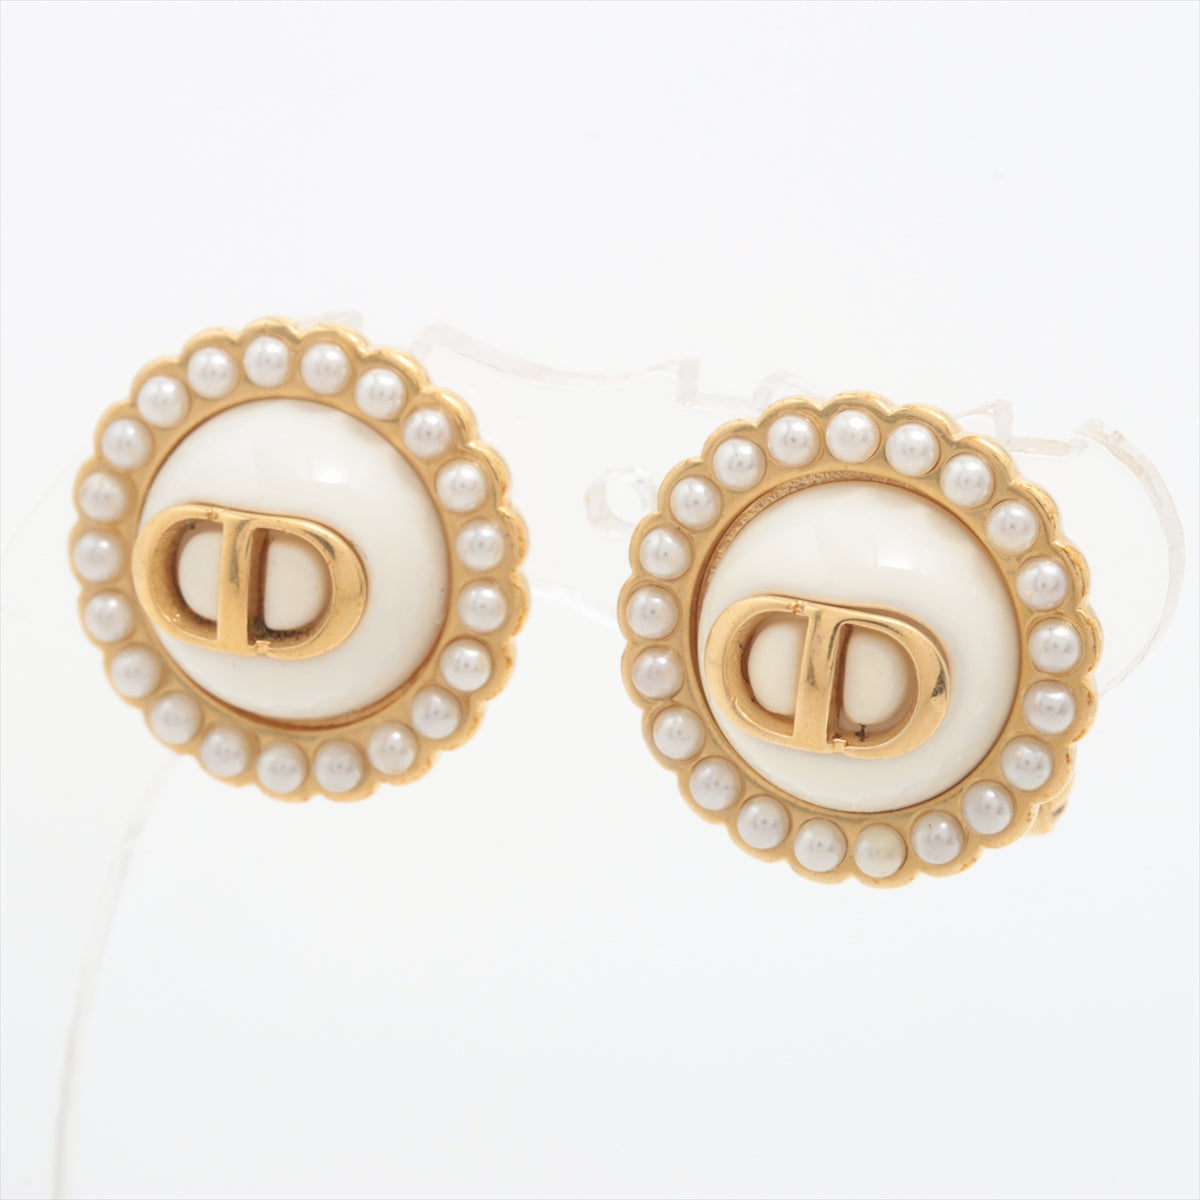 DIOR CLAIR D LUNE Clerc Doo Lune Earrings (for both ears) GP x fake pearl Gold